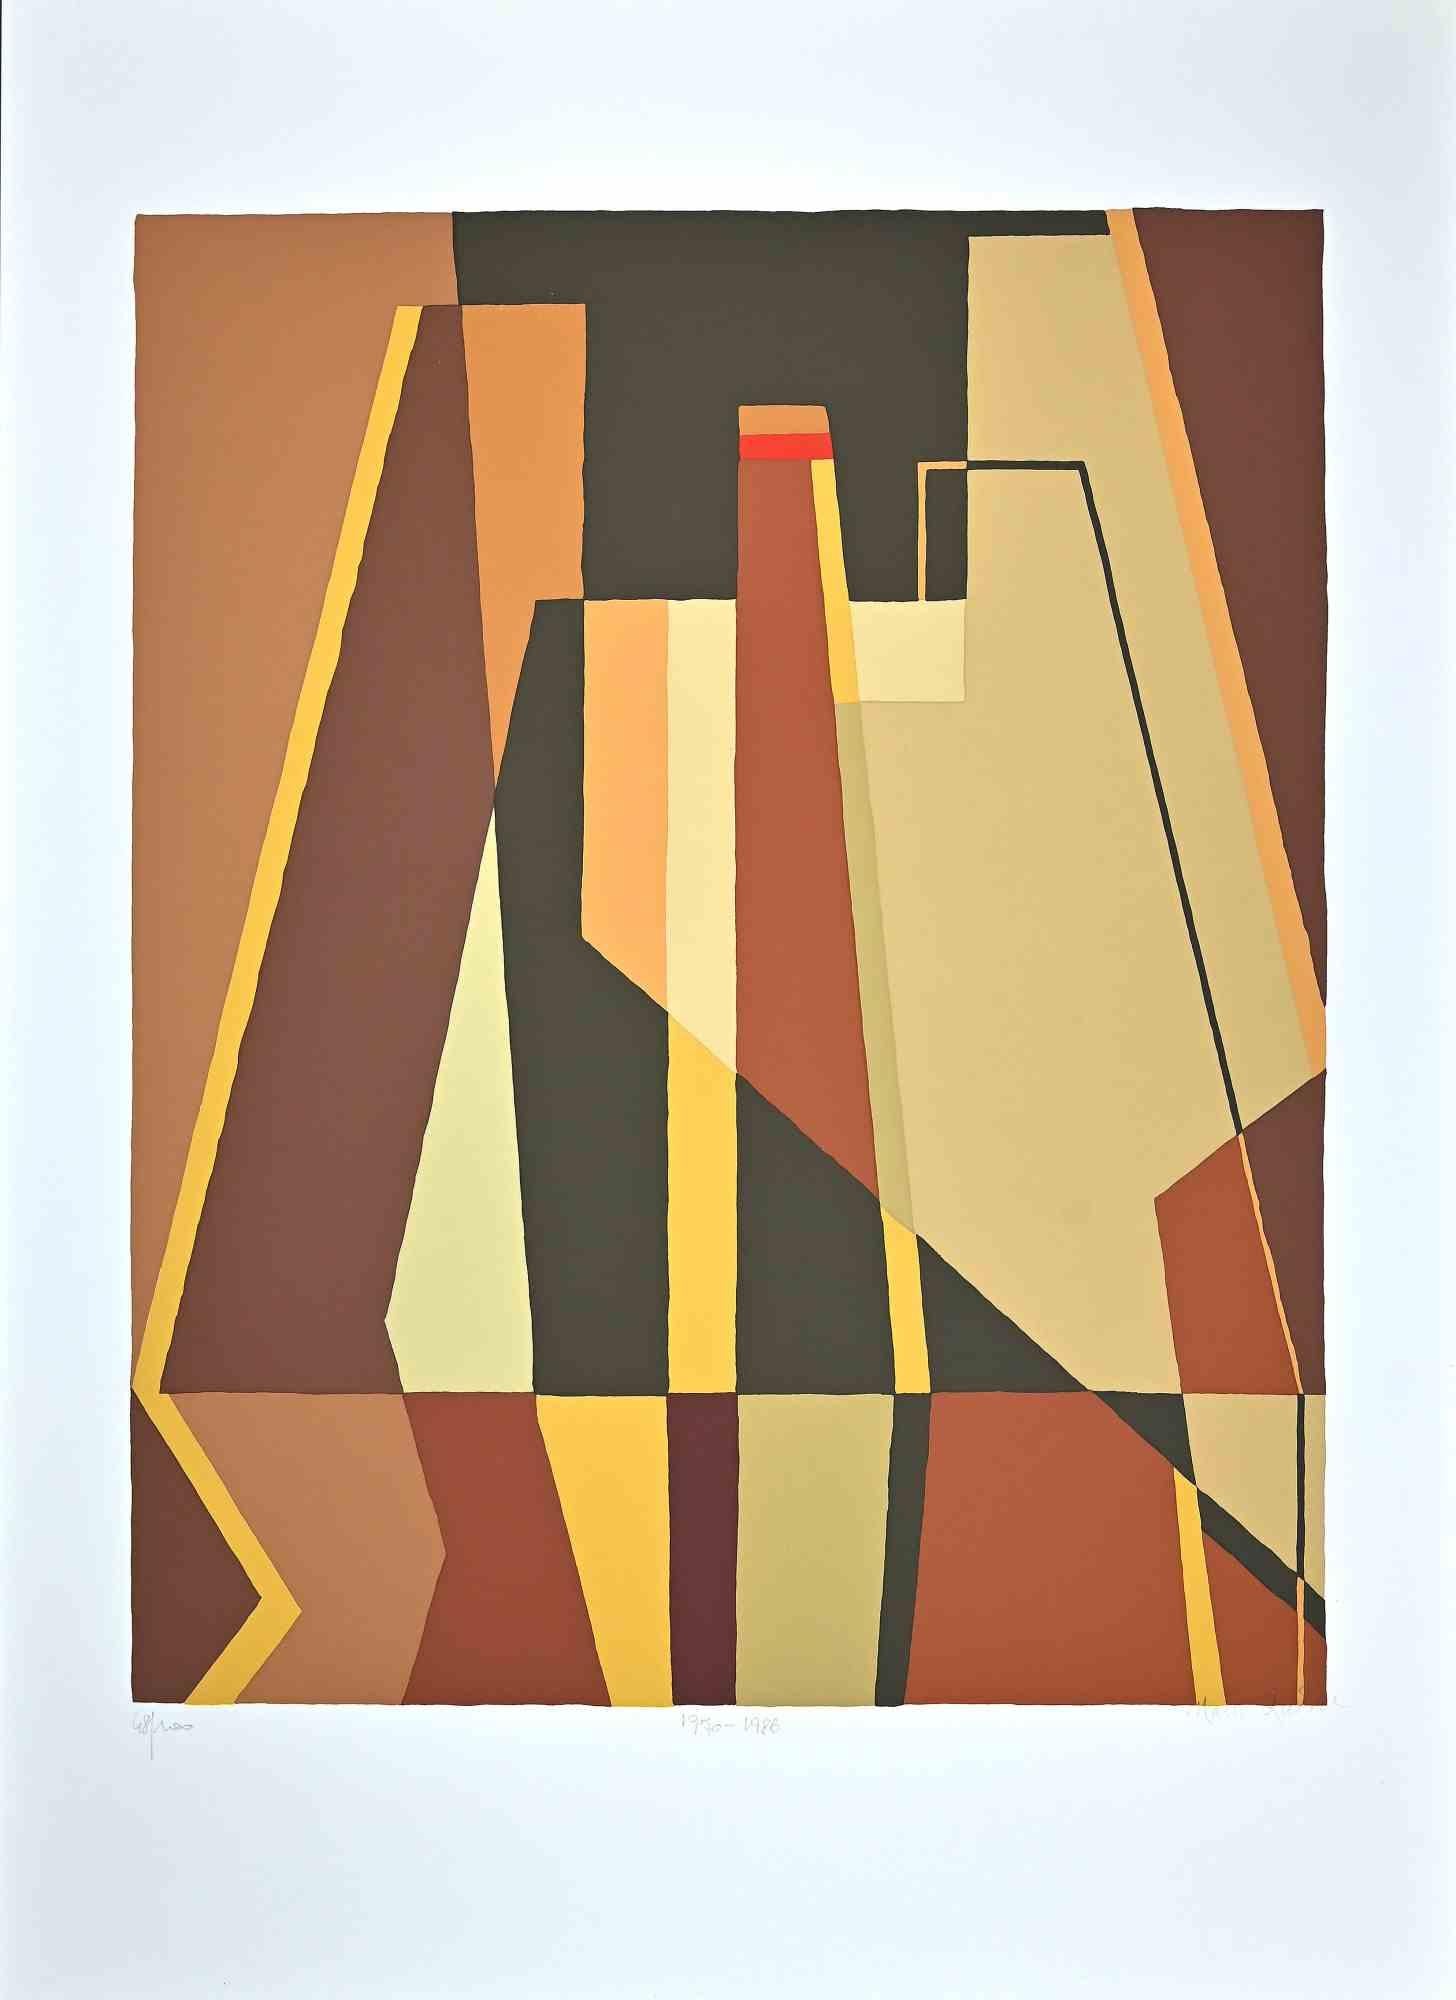 Abstract Composition - Screen Print by Mario Radice - 1988